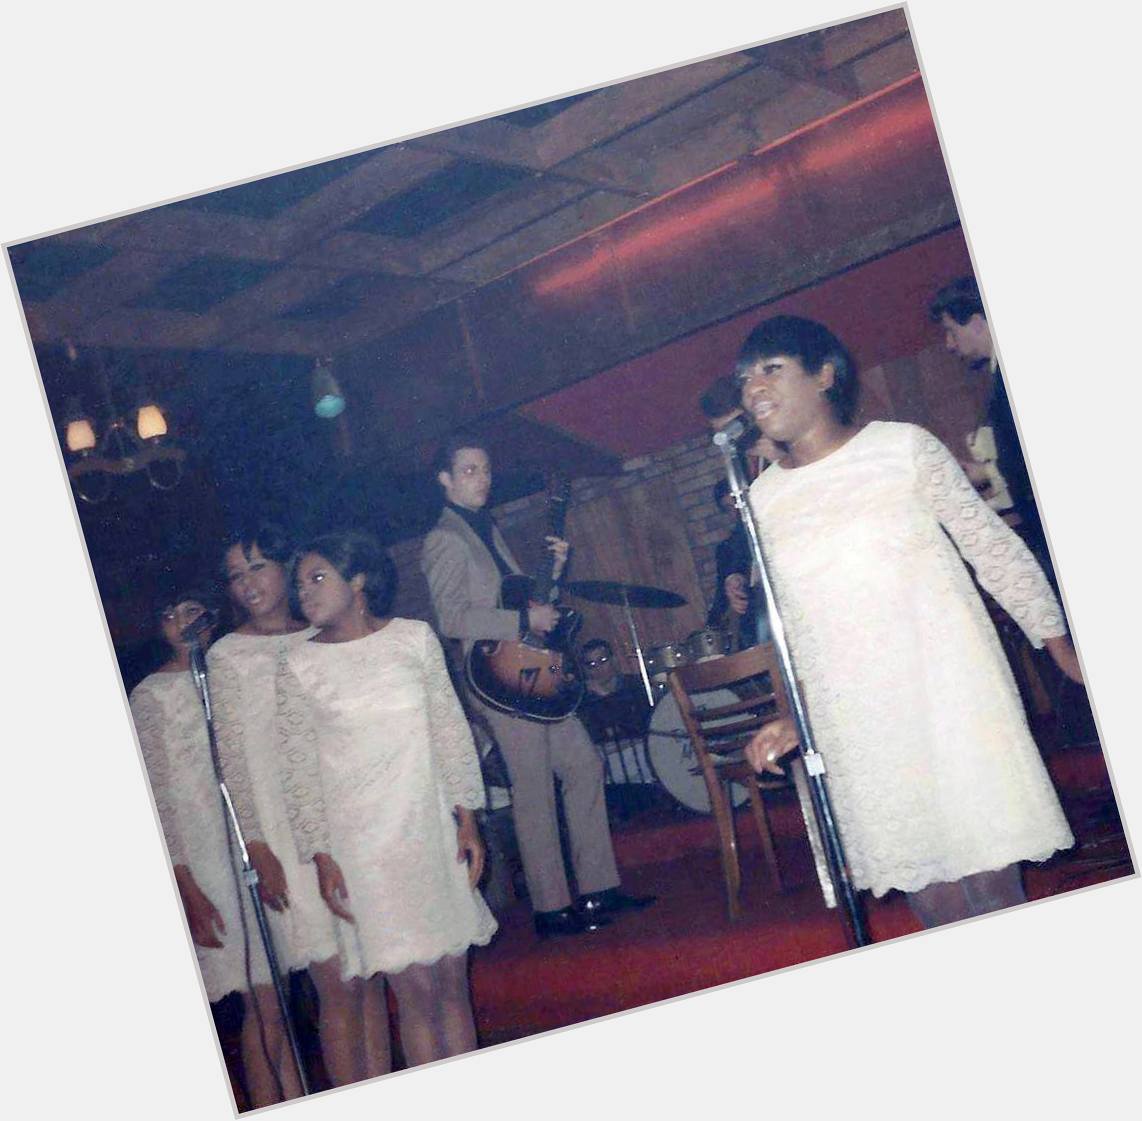 Happy Birthday Cindy Birdsong!
Second from the left. Me on guitar.
b. December 15, 1939 